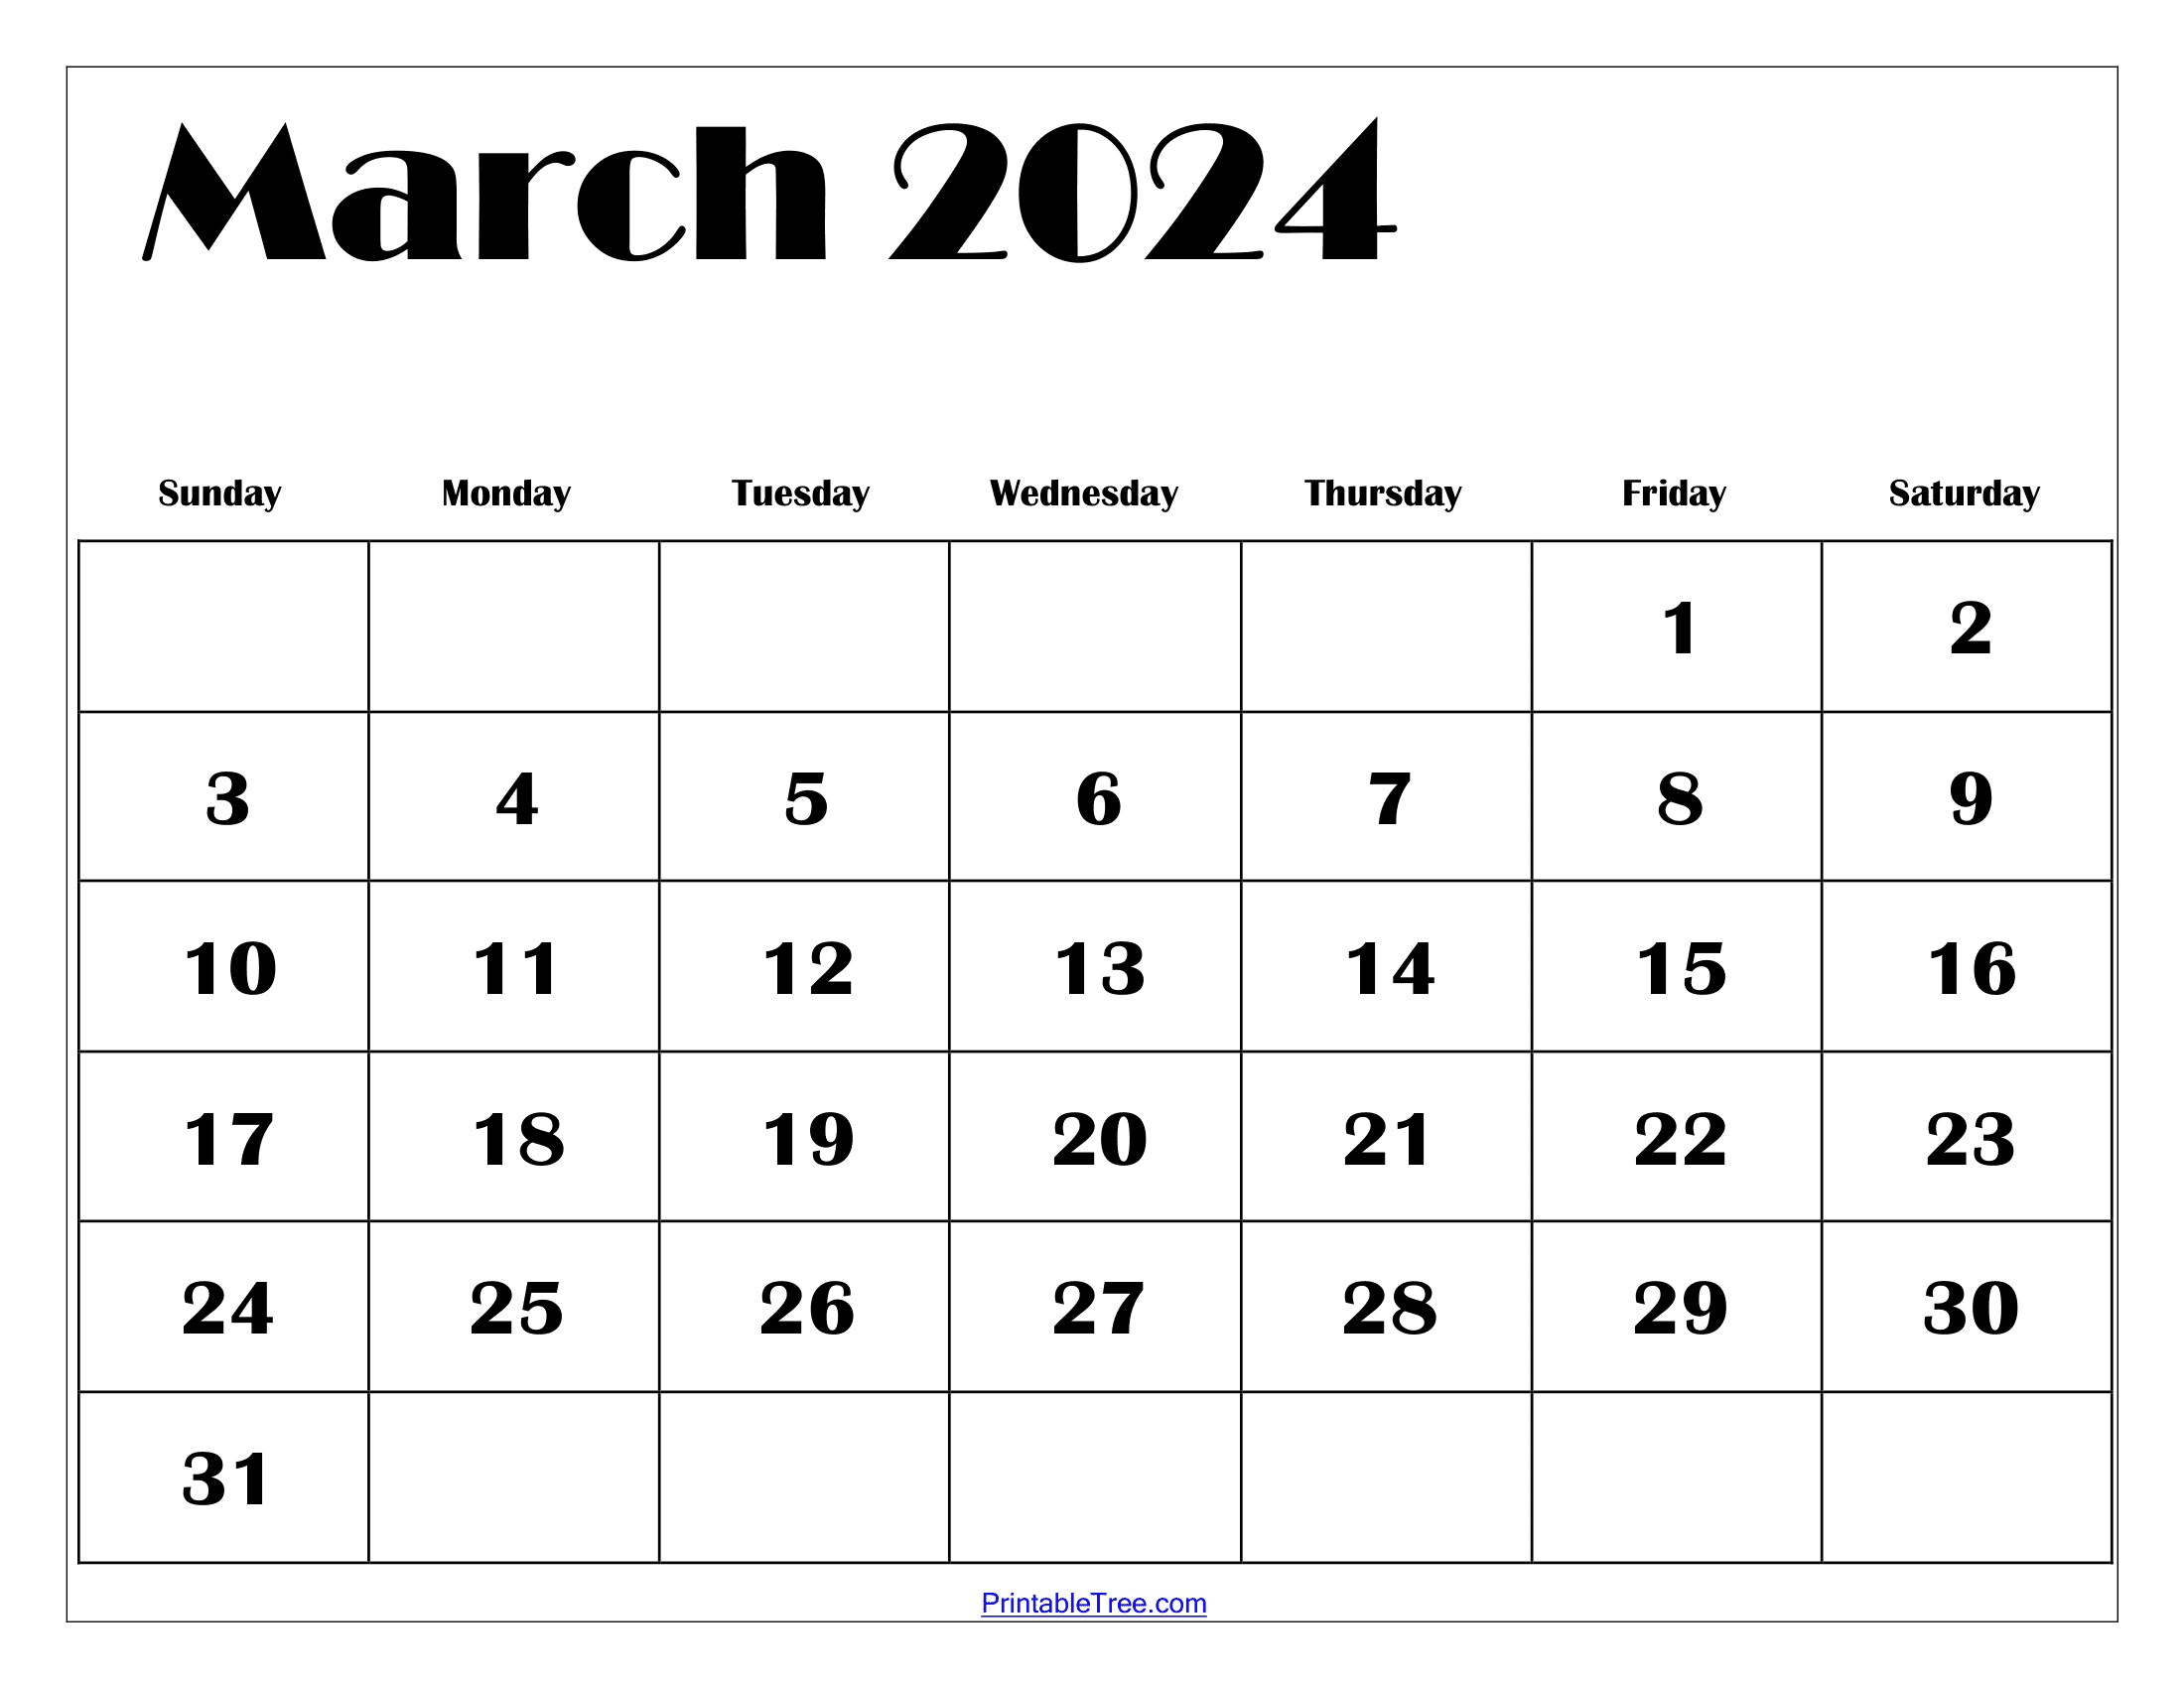 March 2024 Calendar Printable Pdf With Holidays Template Free for Monthly Calendar Printable March 2024